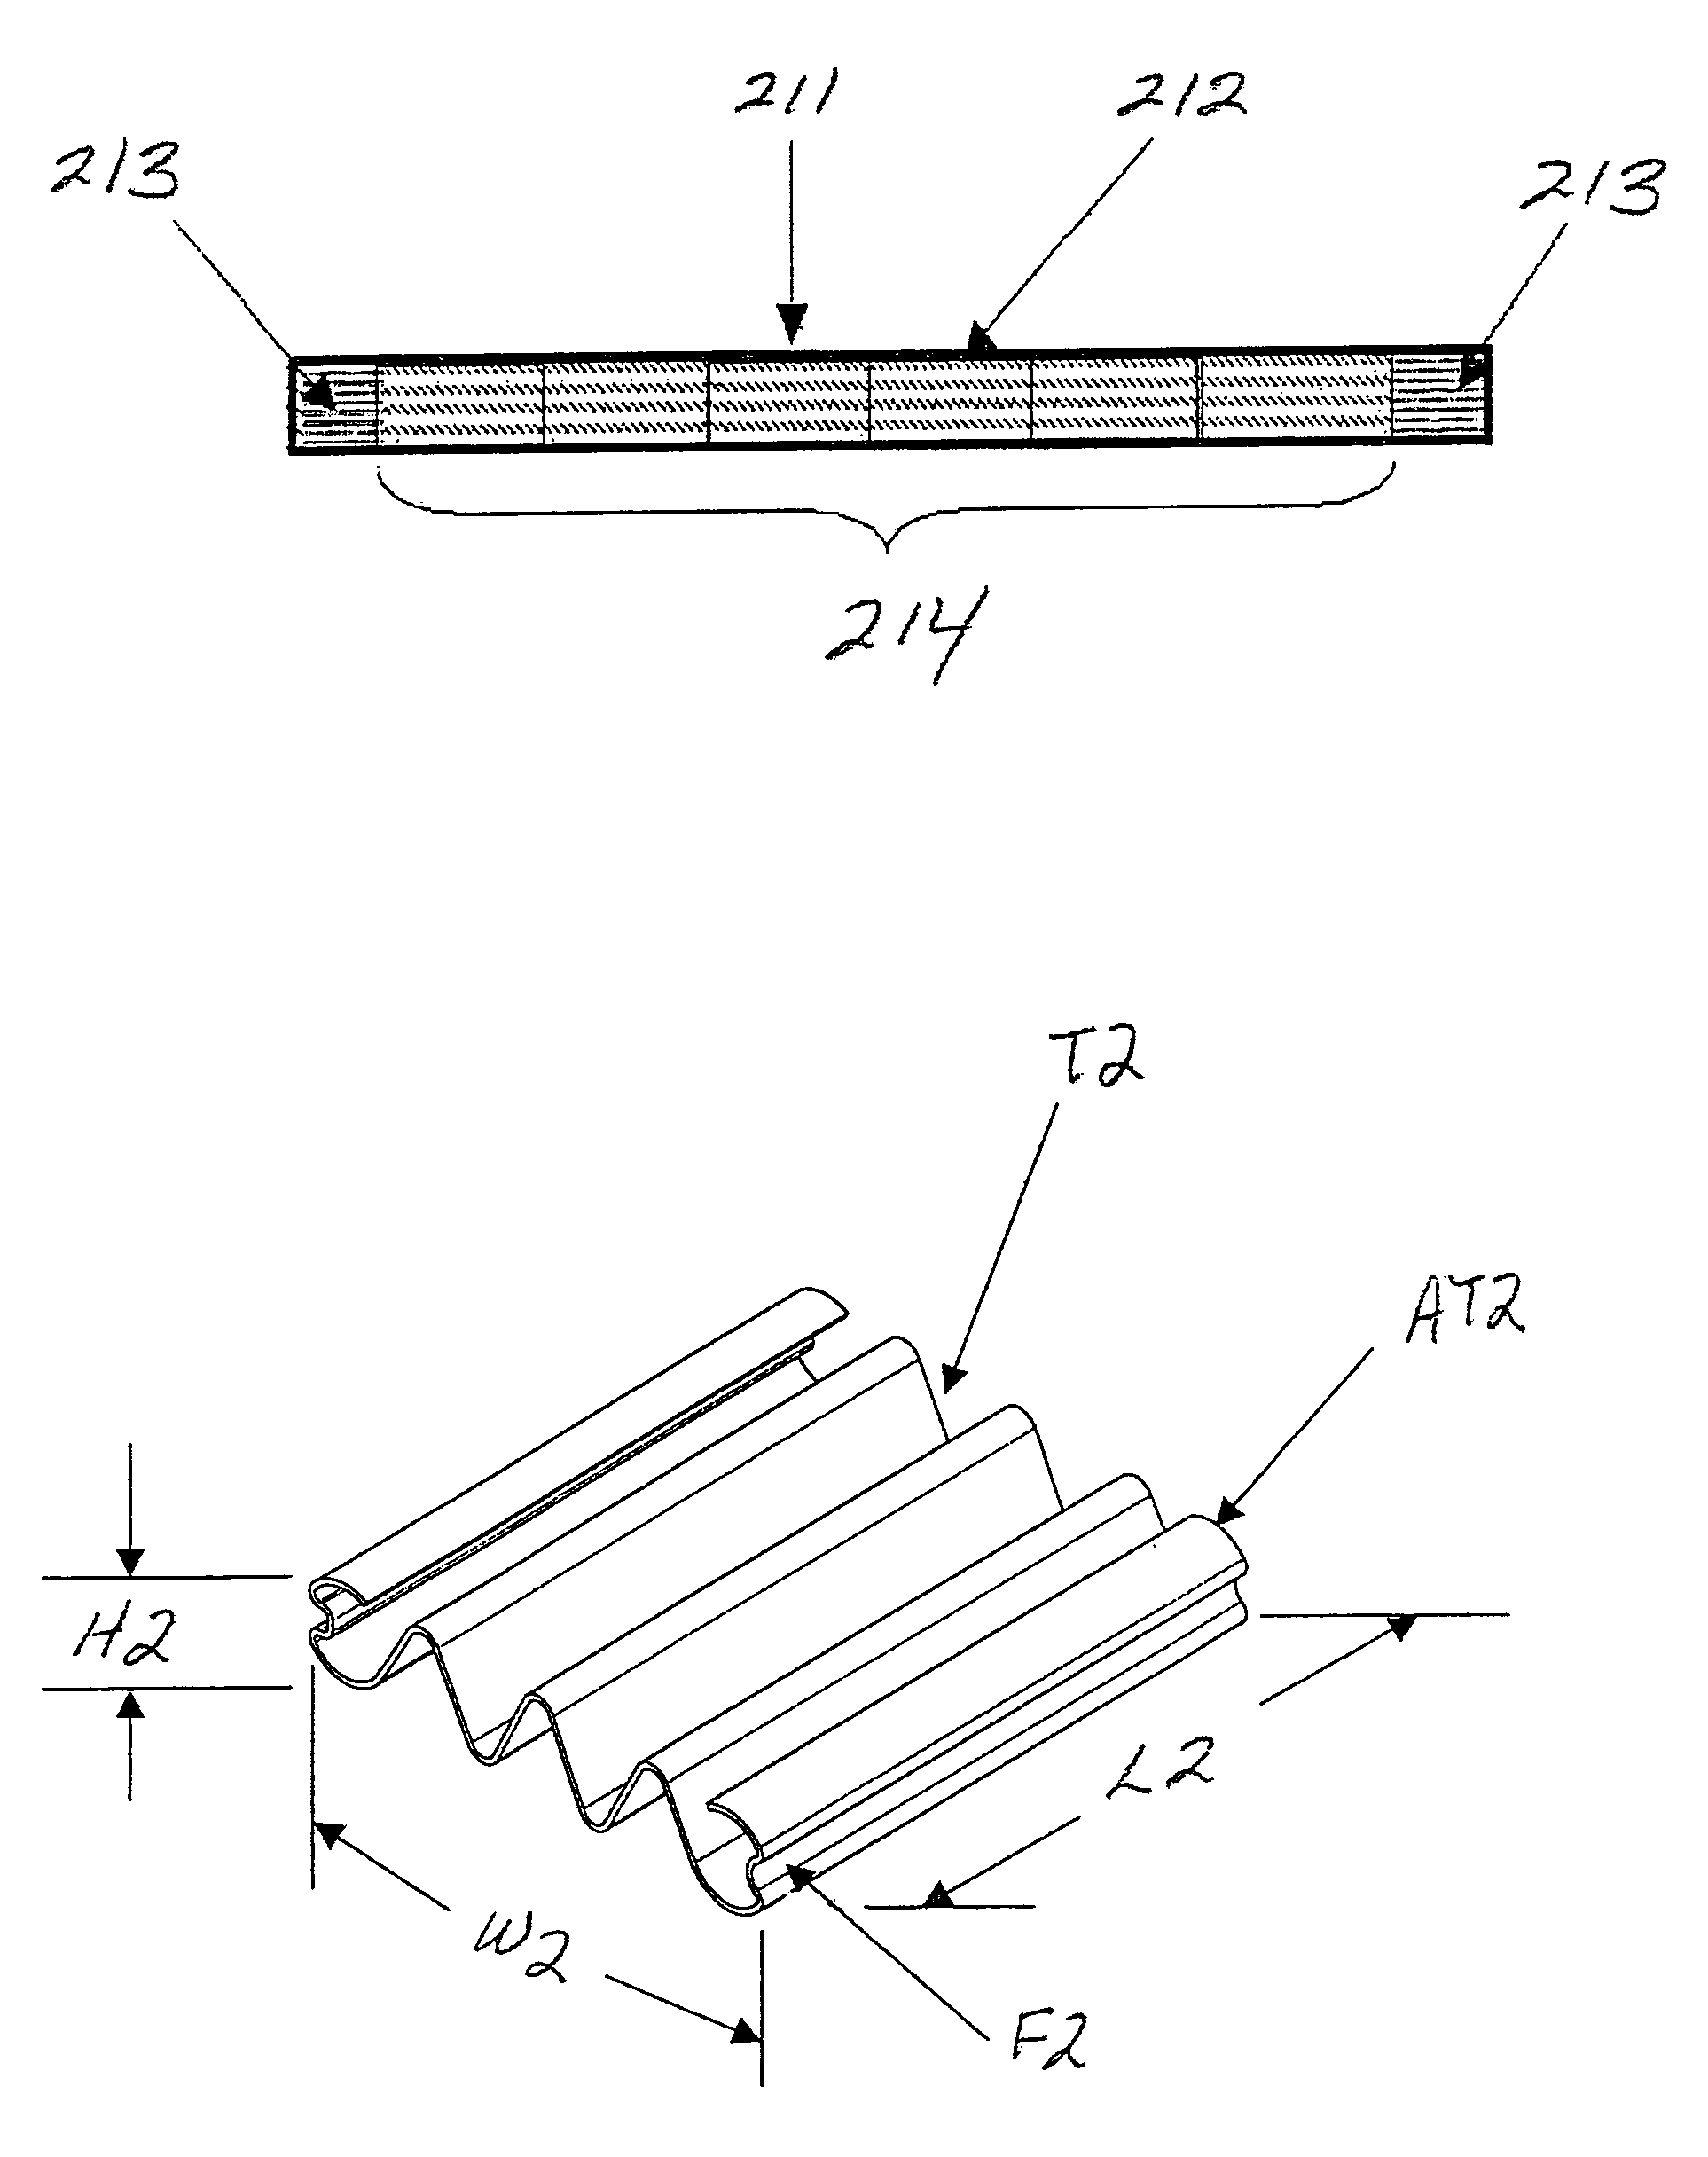 Automotive heat exchanger assemblies having internal fins and methods of making the same